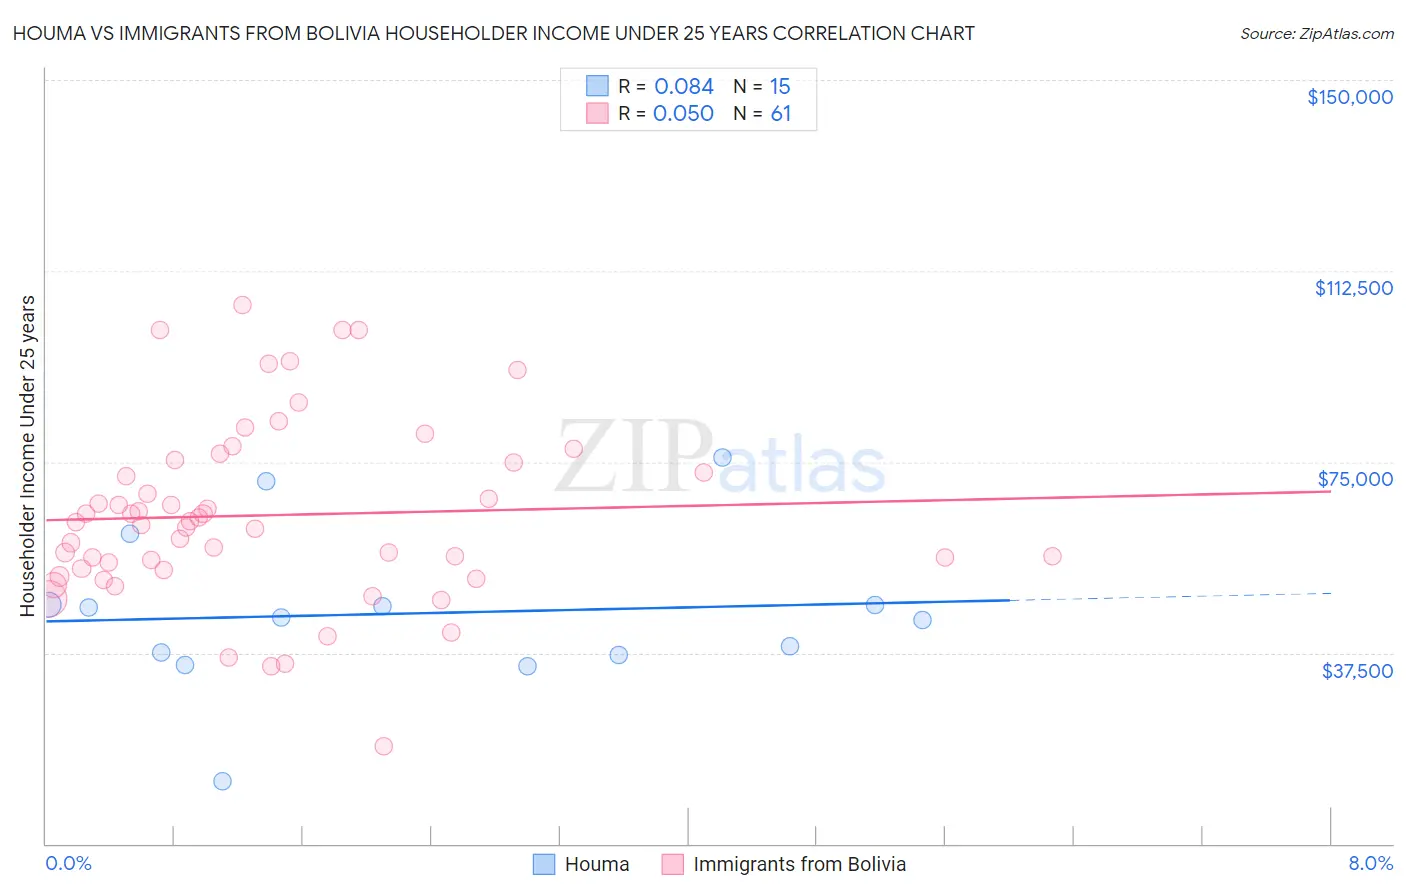 Houma vs Immigrants from Bolivia Householder Income Under 25 years